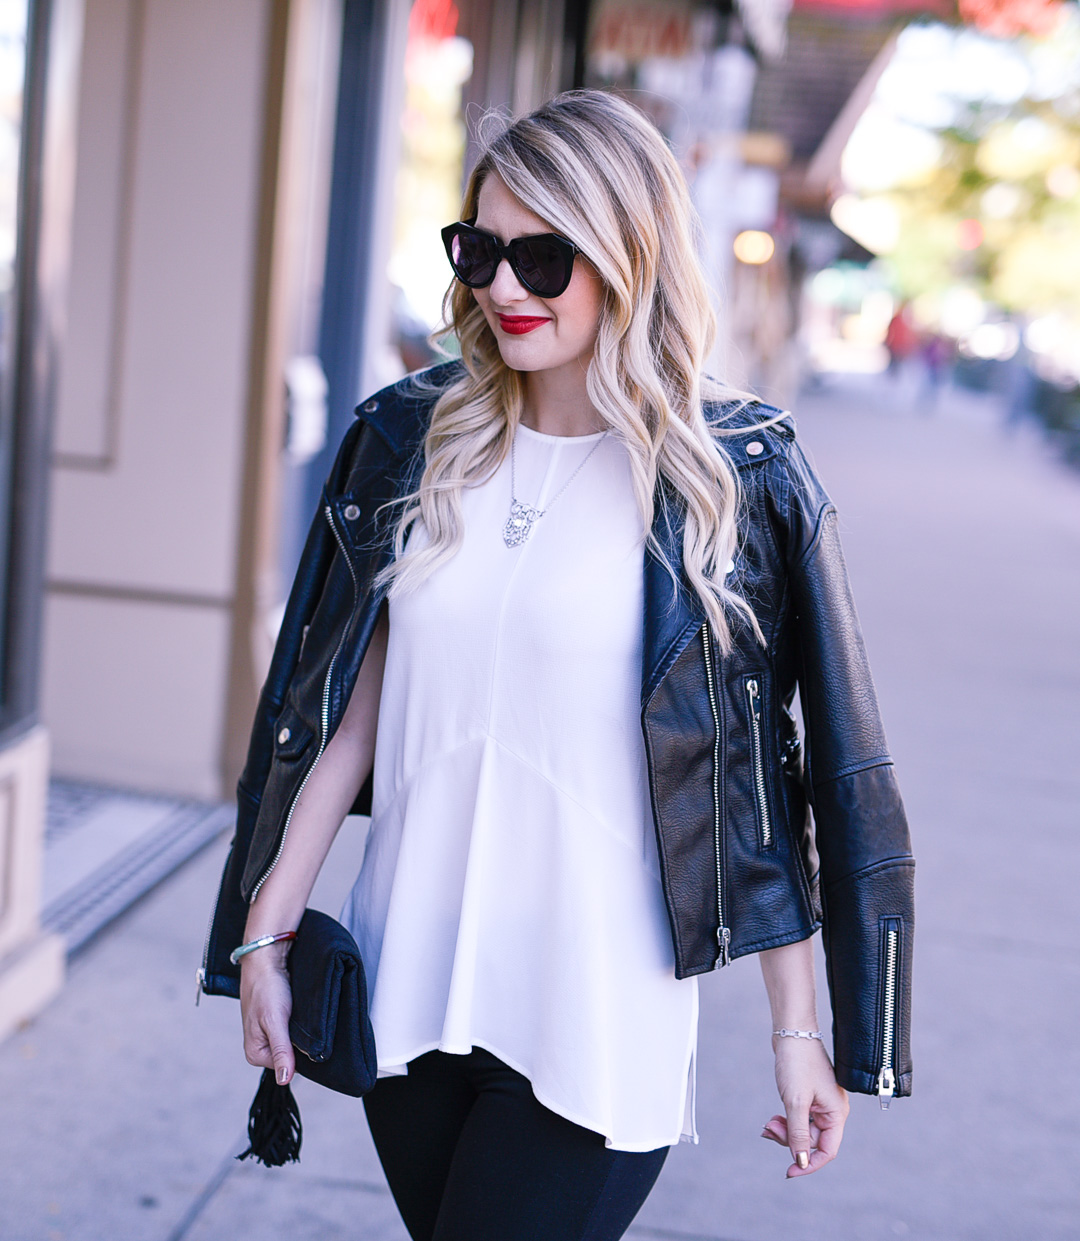 Jenna Colgrove wearing the Blank NYC Easy Rider Leather Jacket and JTV Titanic necklace.